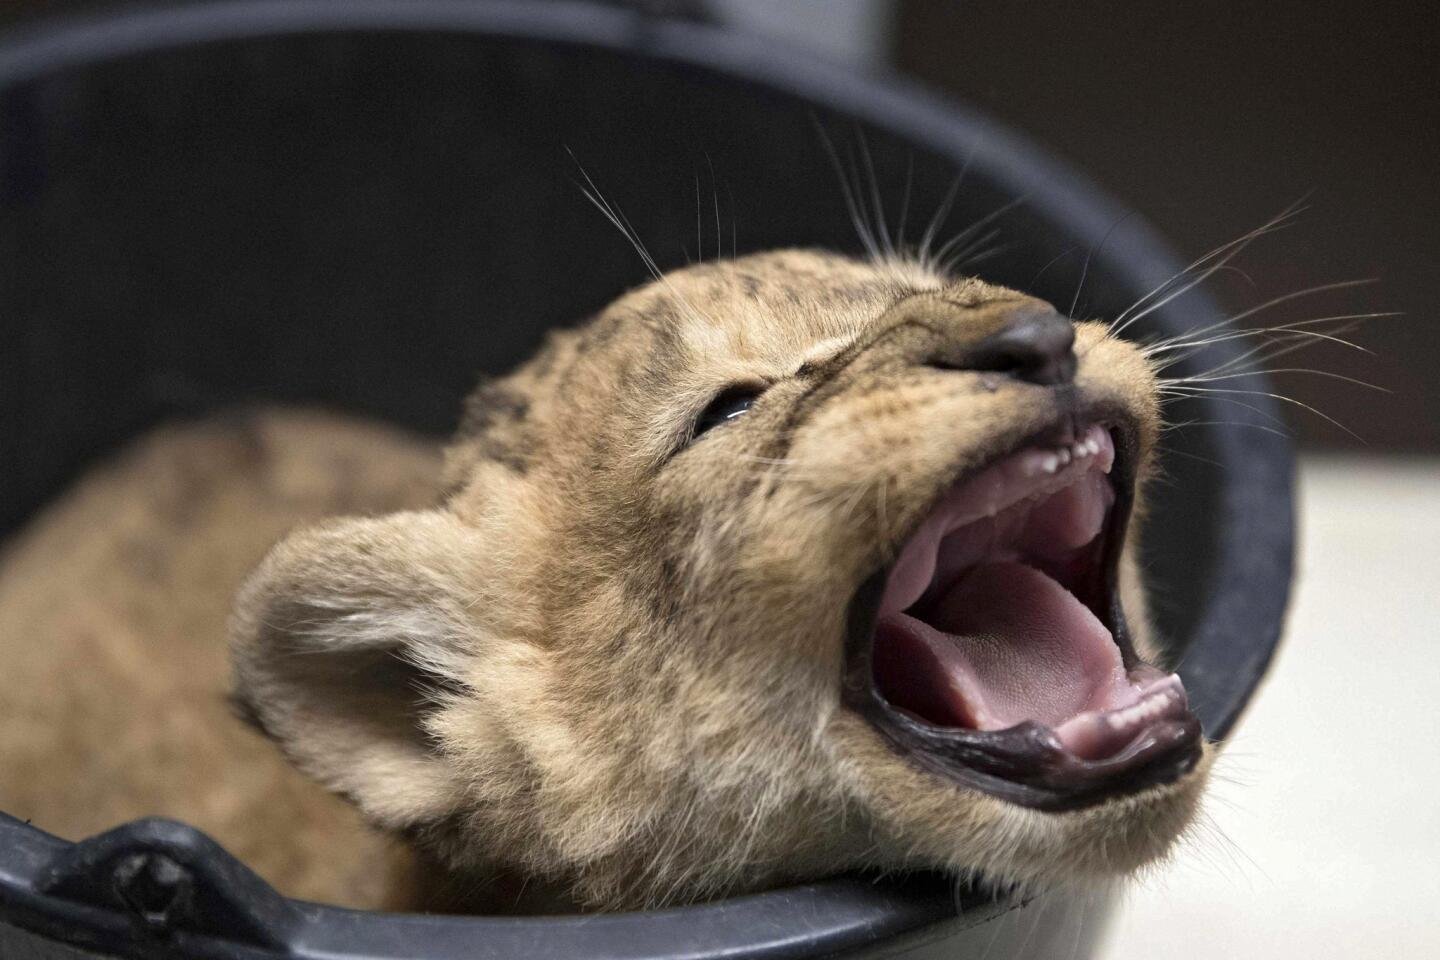 One of three lion cubs that were born at Gaia Zoo is introduced in Kerkrade, the Netherlands, on July 5, 2016.